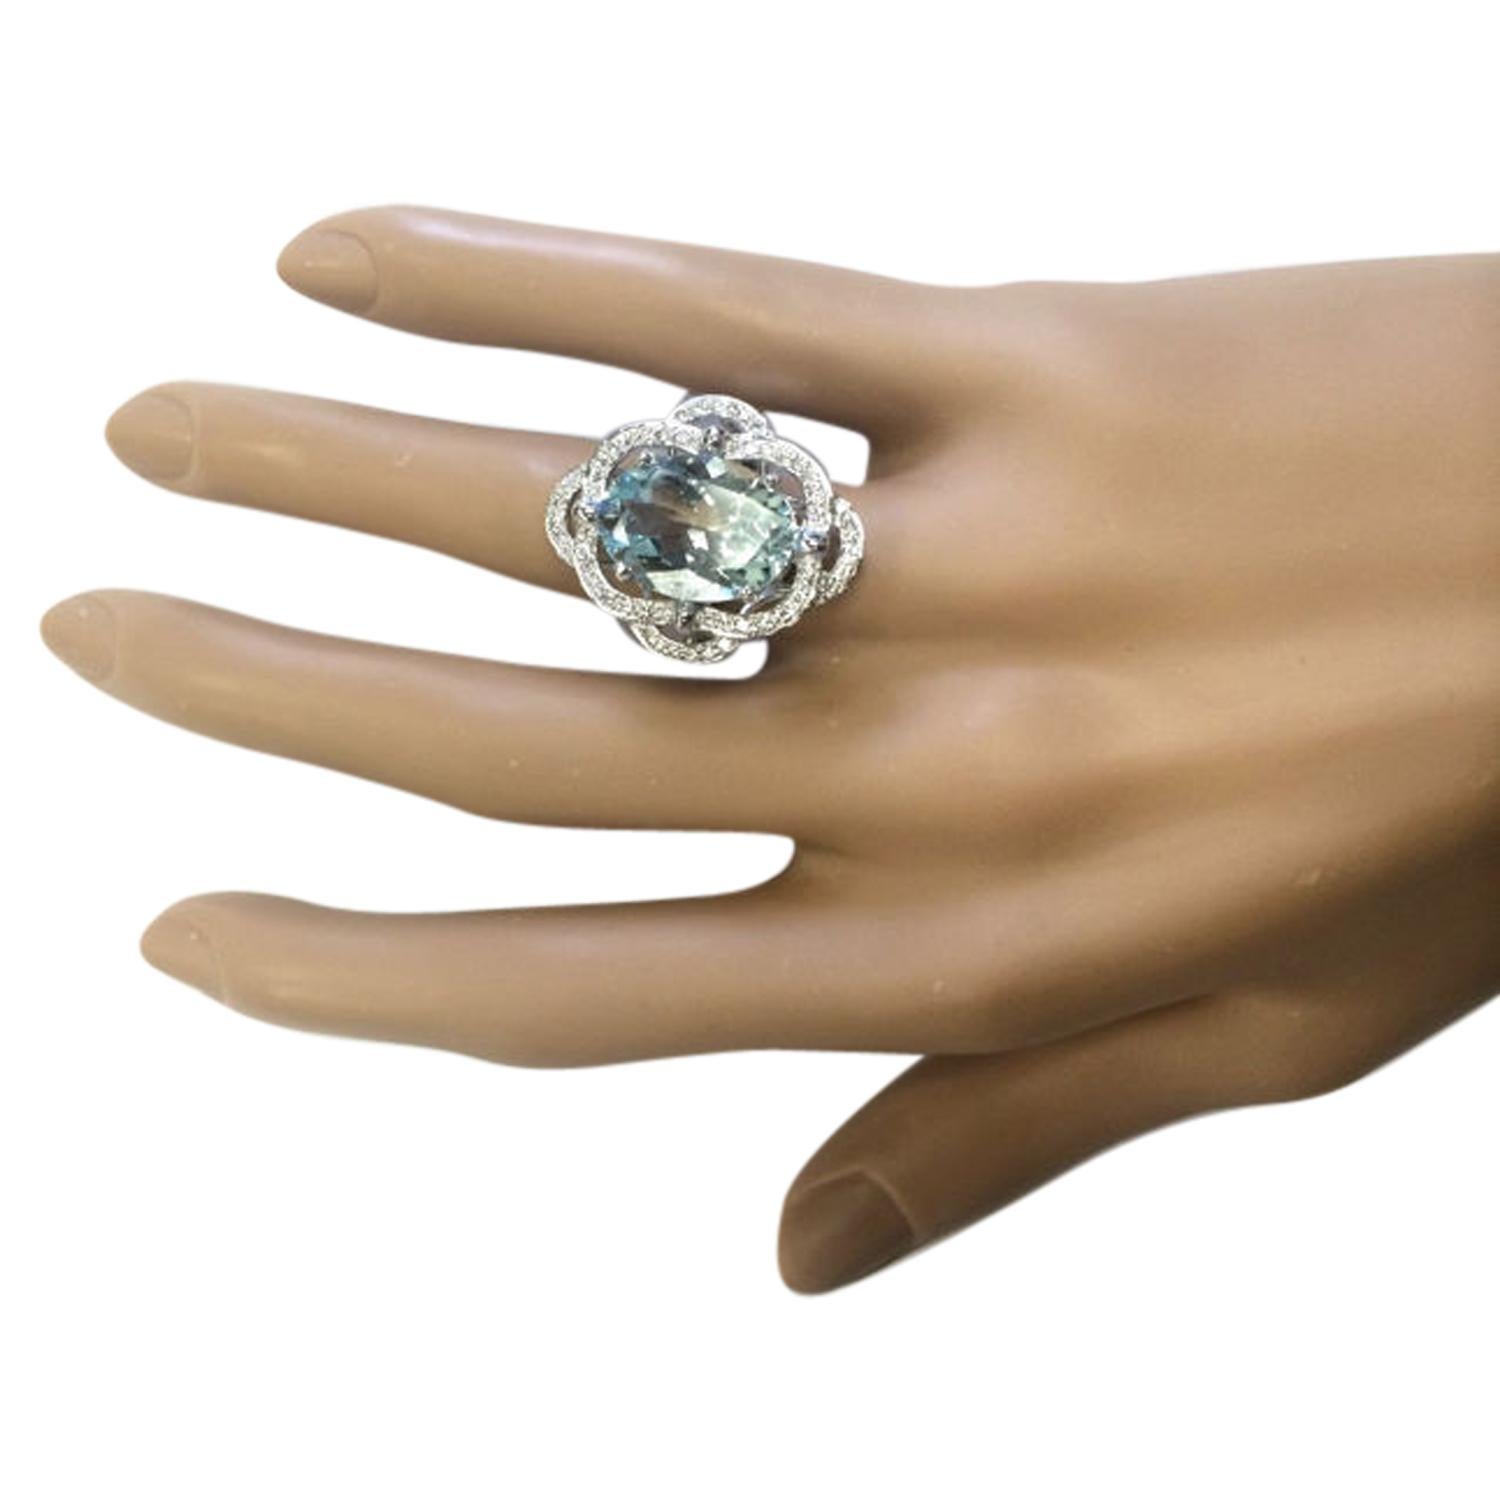 6.97 Carat Natural Aquamarine 14 Karat Solid White Gold Diamond Ring
Stamped: 14K 
Total Ring Weight: 7.3 Grams 
Aquamarine Weight: 6.57 Carat (15.00x11.00 Millimeters)  
Diamond Weight: 0.40 Carat (F-G Color, VS2-SI1 Clarity)
Quantity: 64
Face